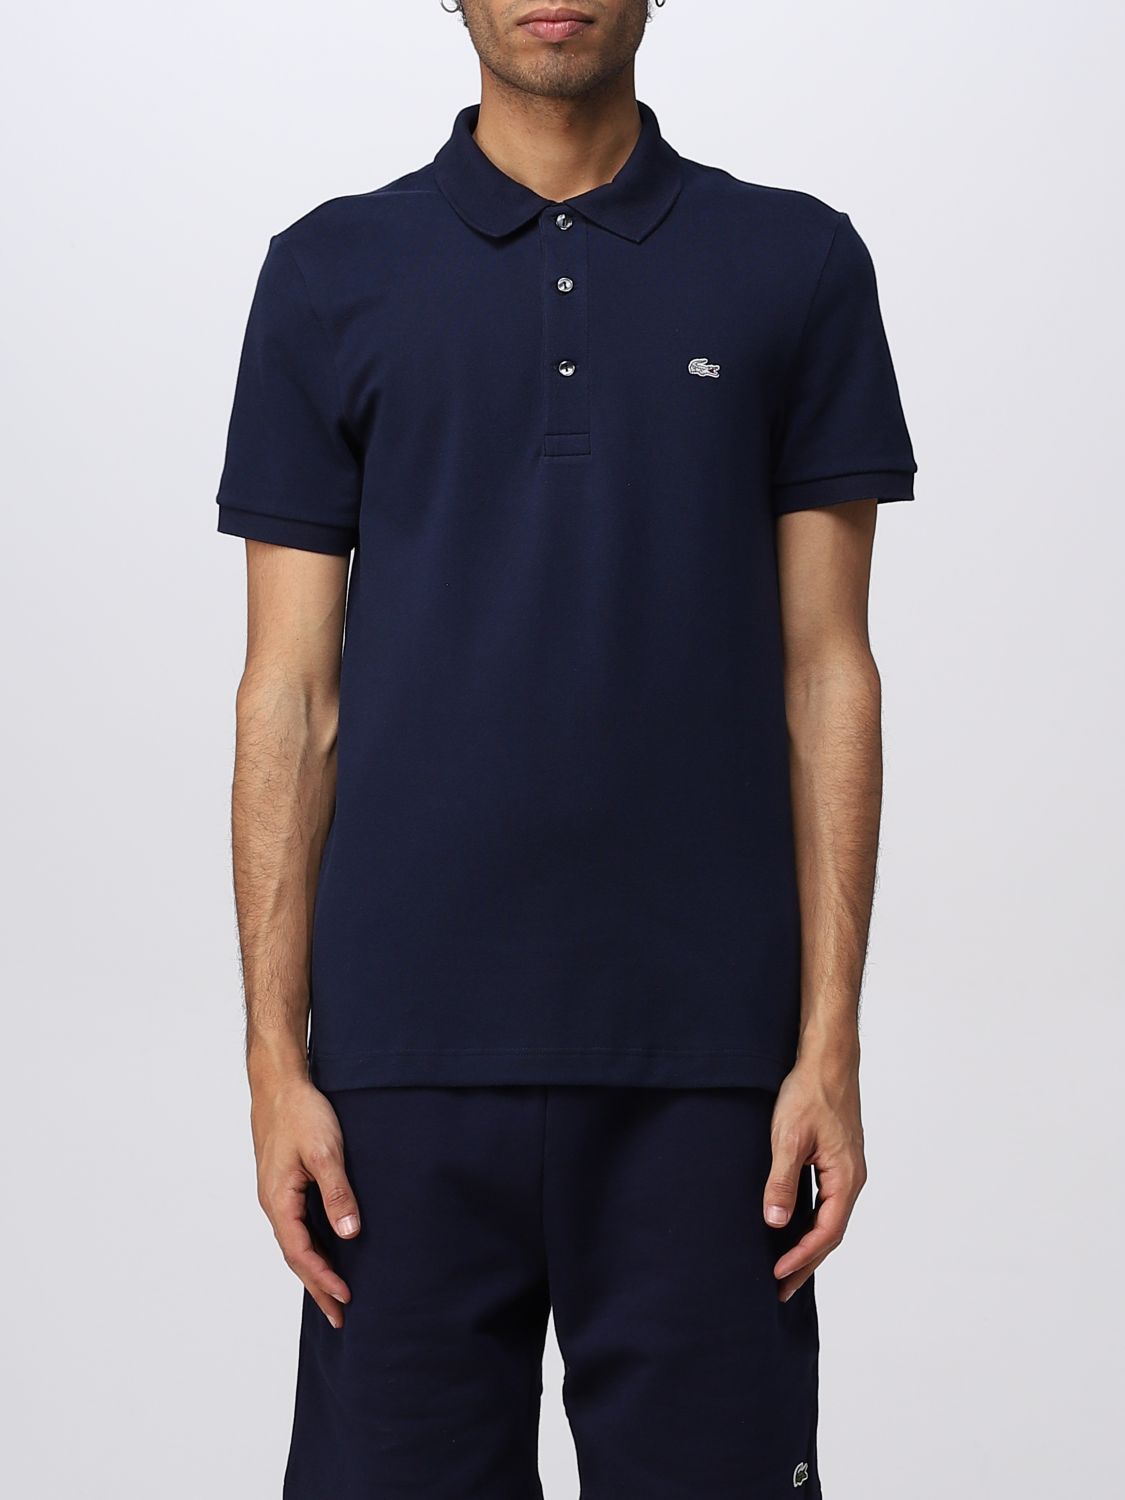 LACOSTE: polo shirt for man - Blue | Lacoste polo shirt PH4014 online